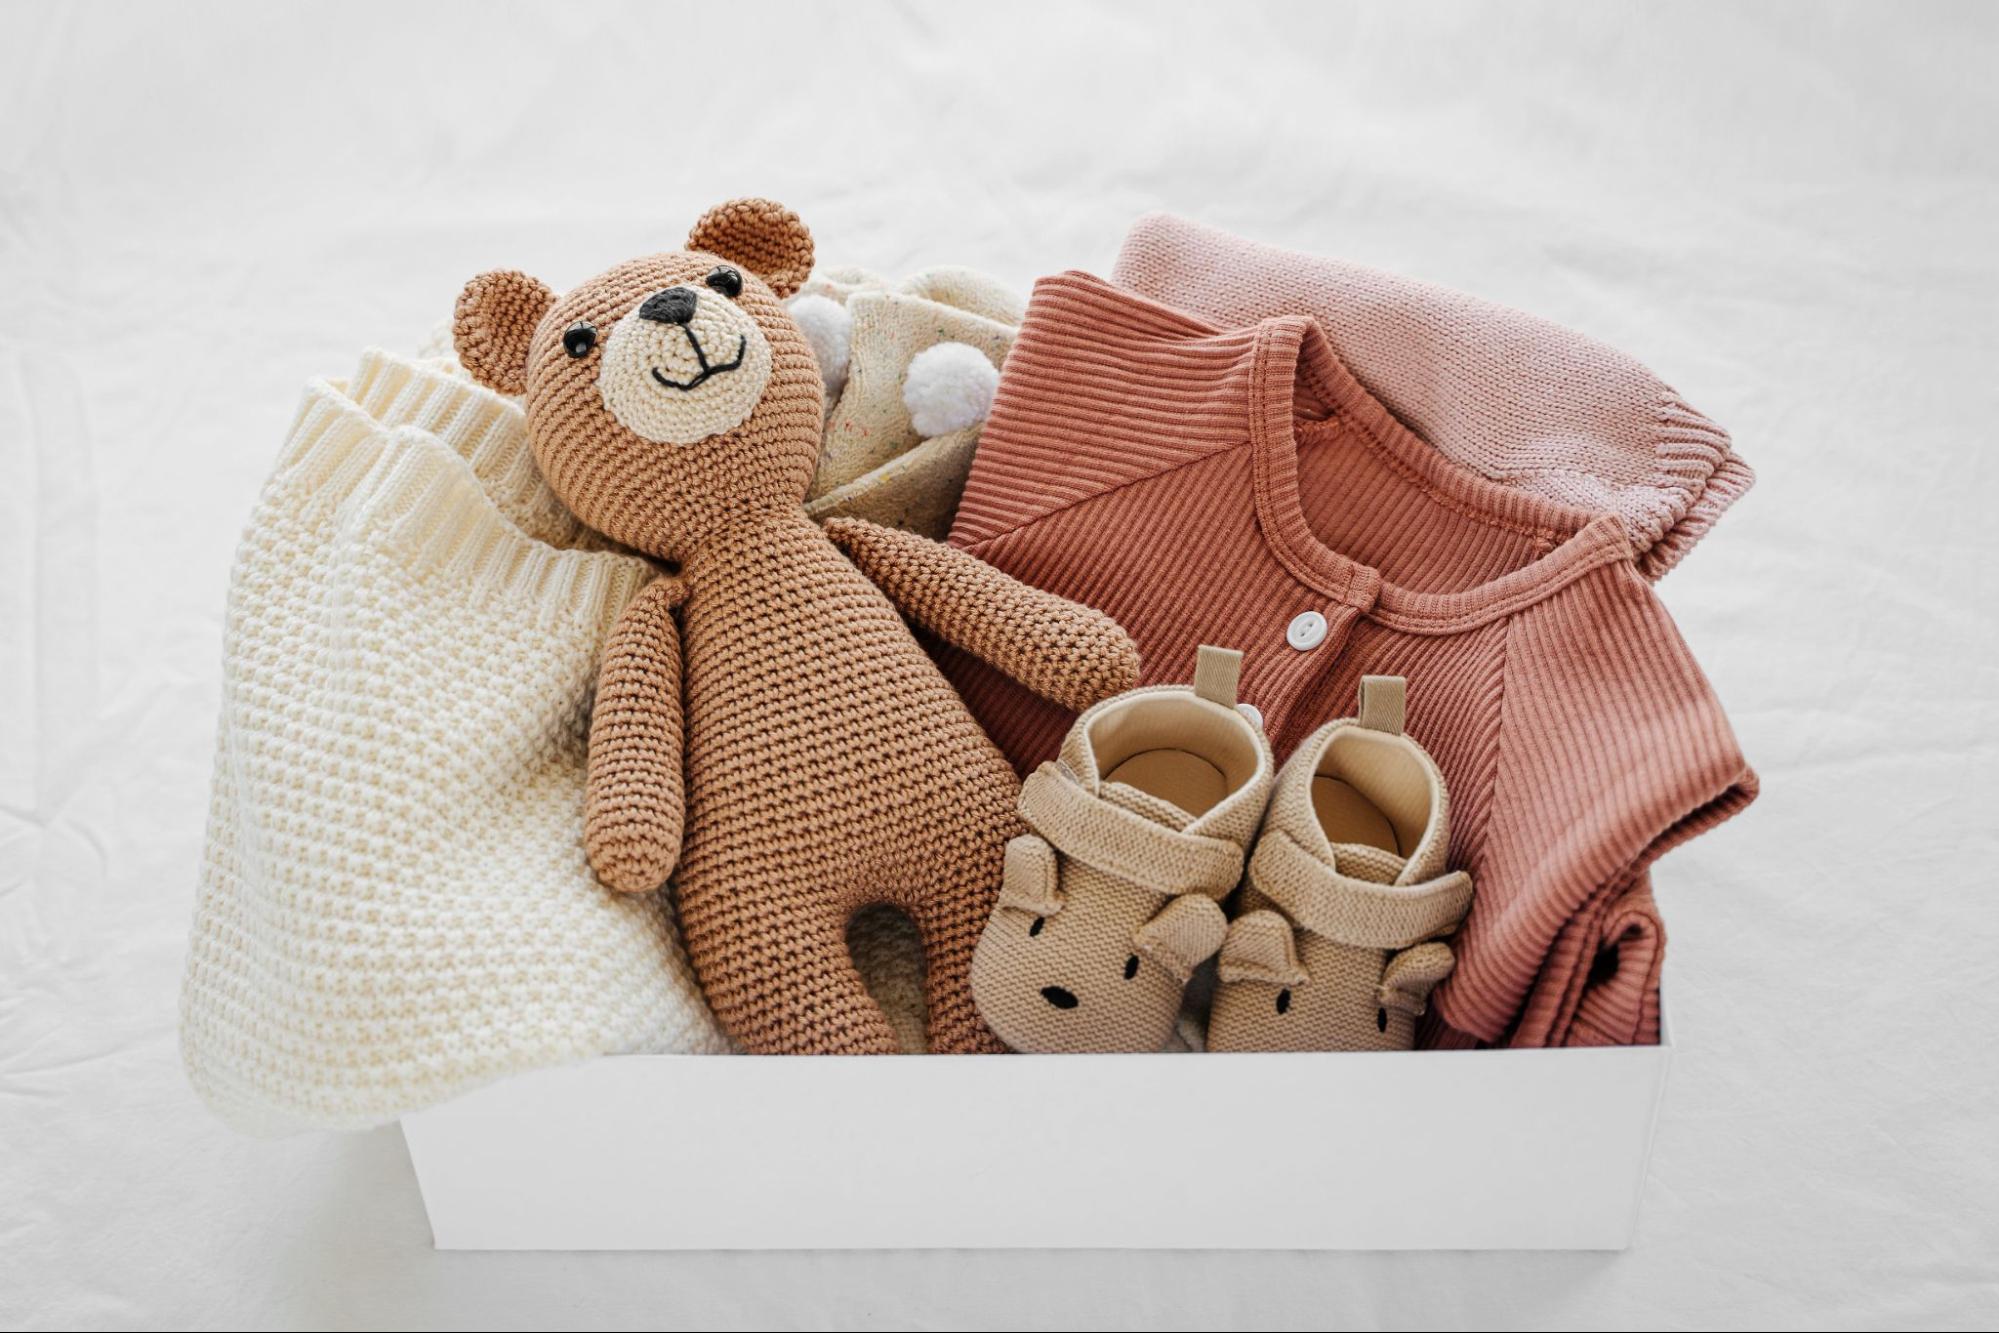 How to Wash Baby Clothes - Baby Clothes Care Guide